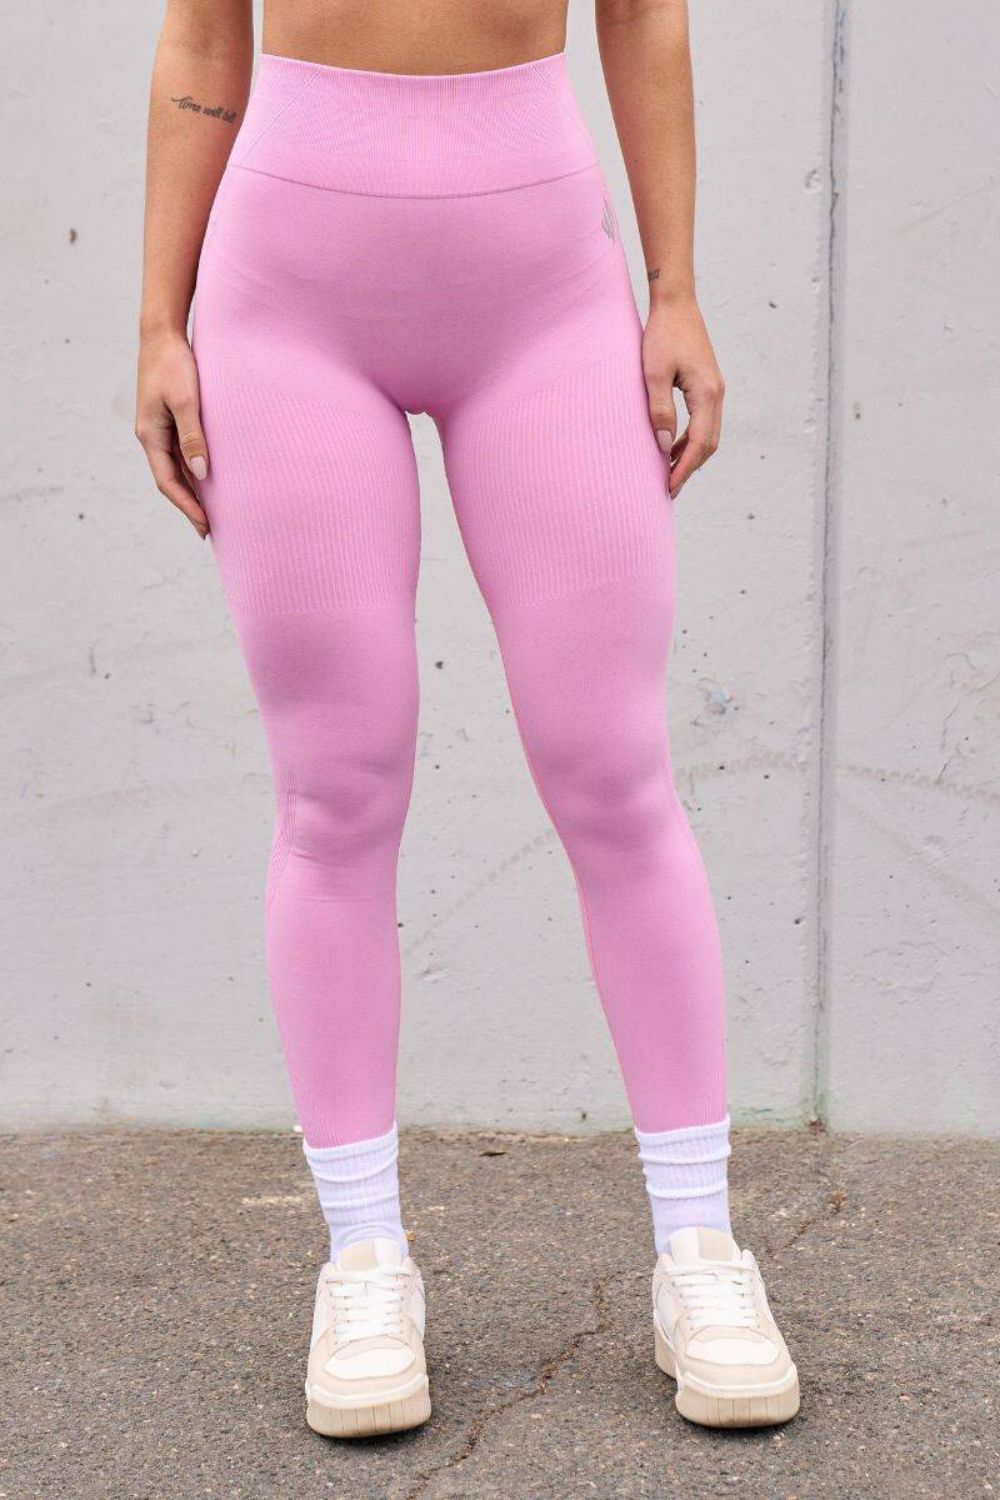 Candy Dedicated Seamless Tights